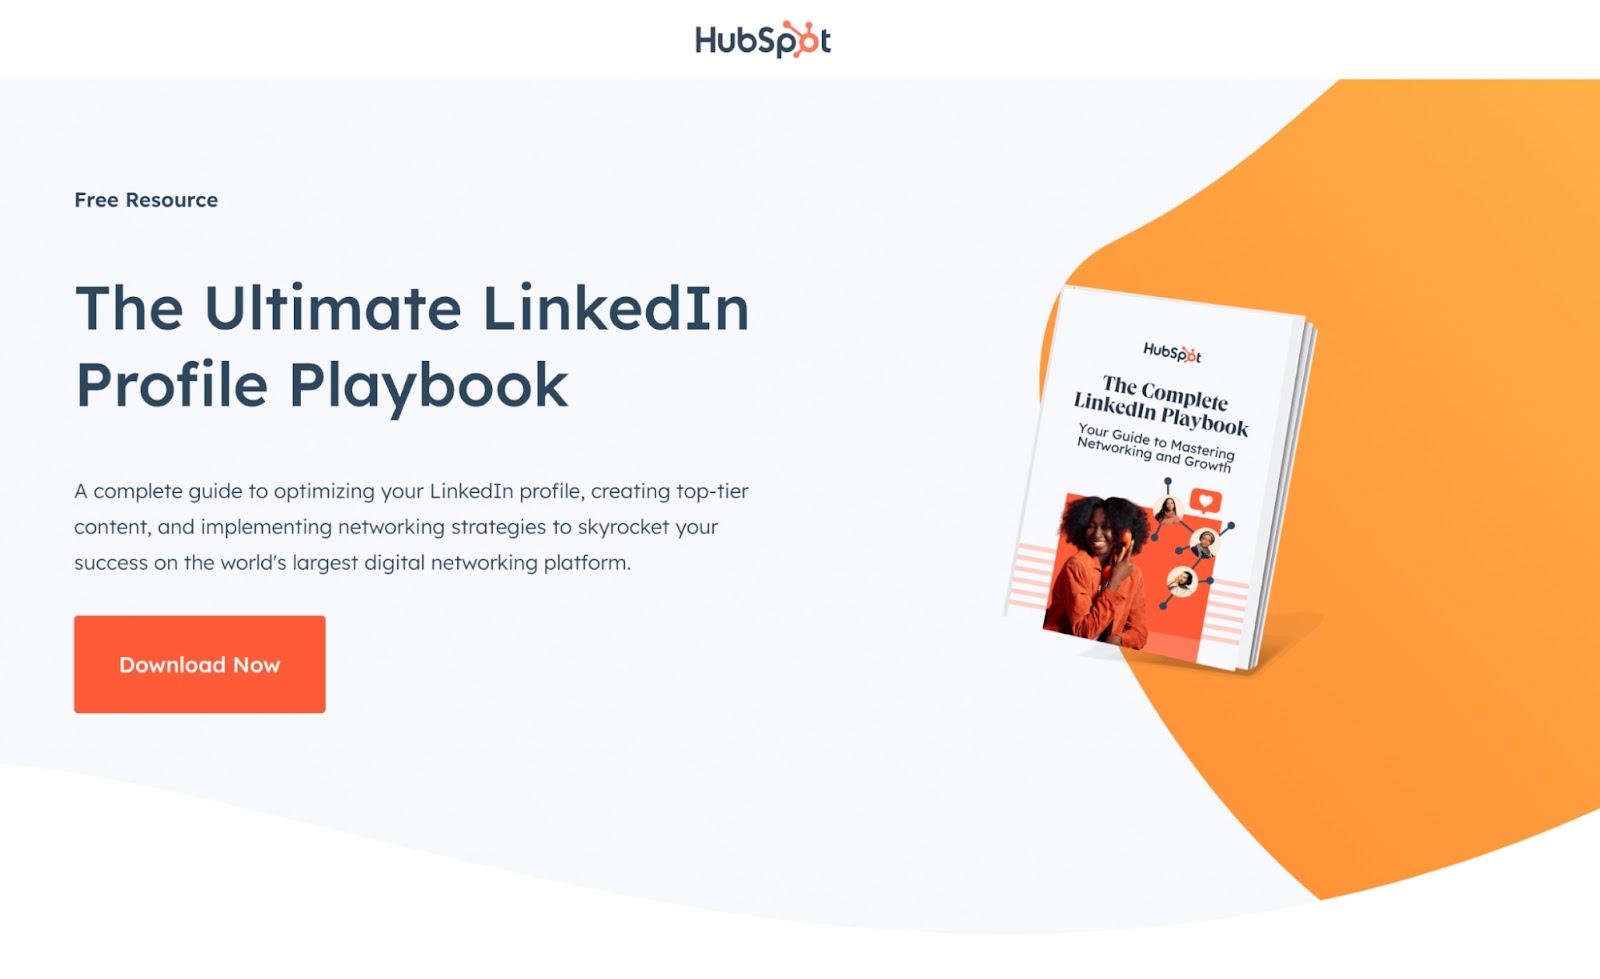 HubSpot’s "The Ultimate LinkedIn Profile Playbook" landing page